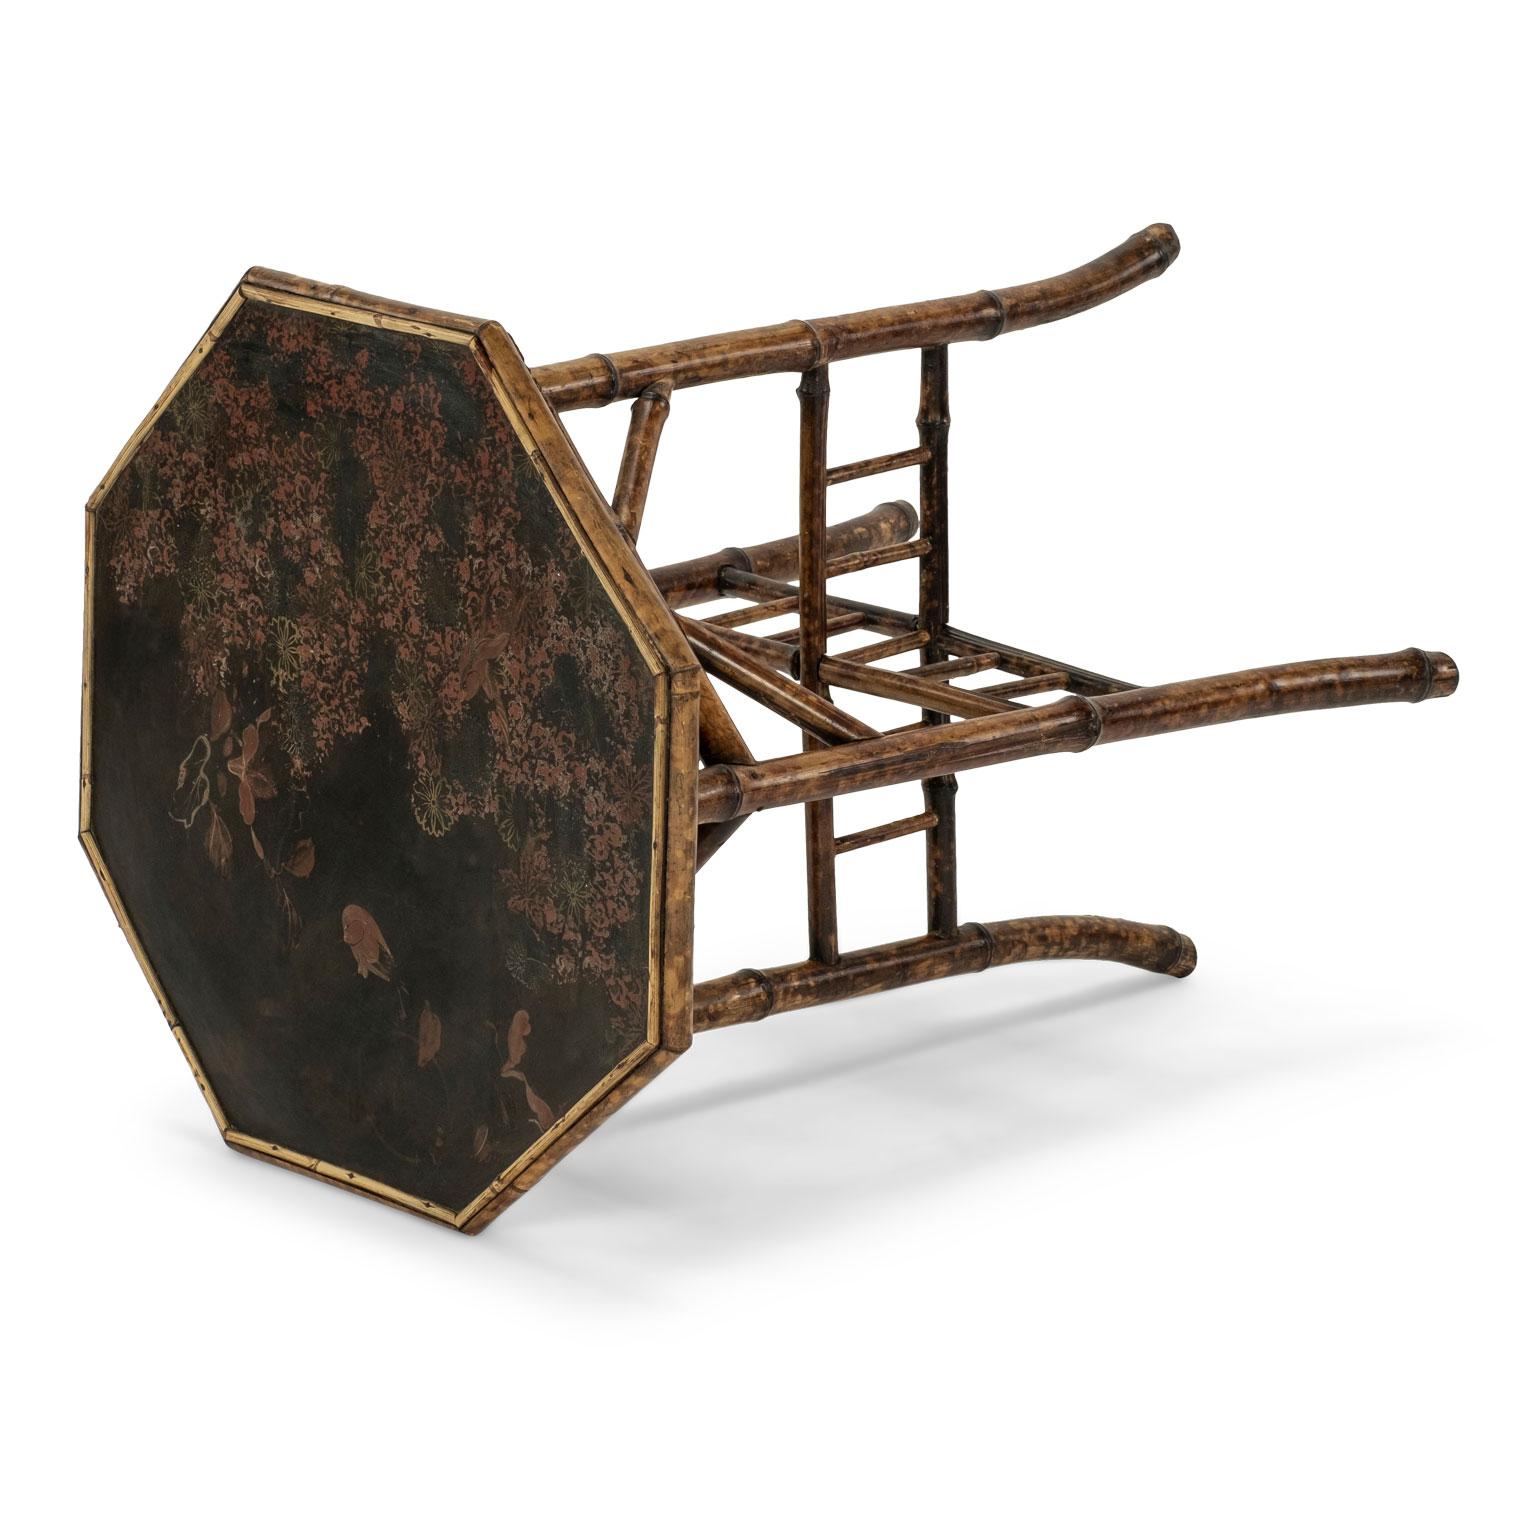 Tortoise shell bamboo side table: bamboo base supporting octagonal shape top adorned by Japanned lacquer scenes of birds, foliage and blossoms tinted in oxblood red on black.